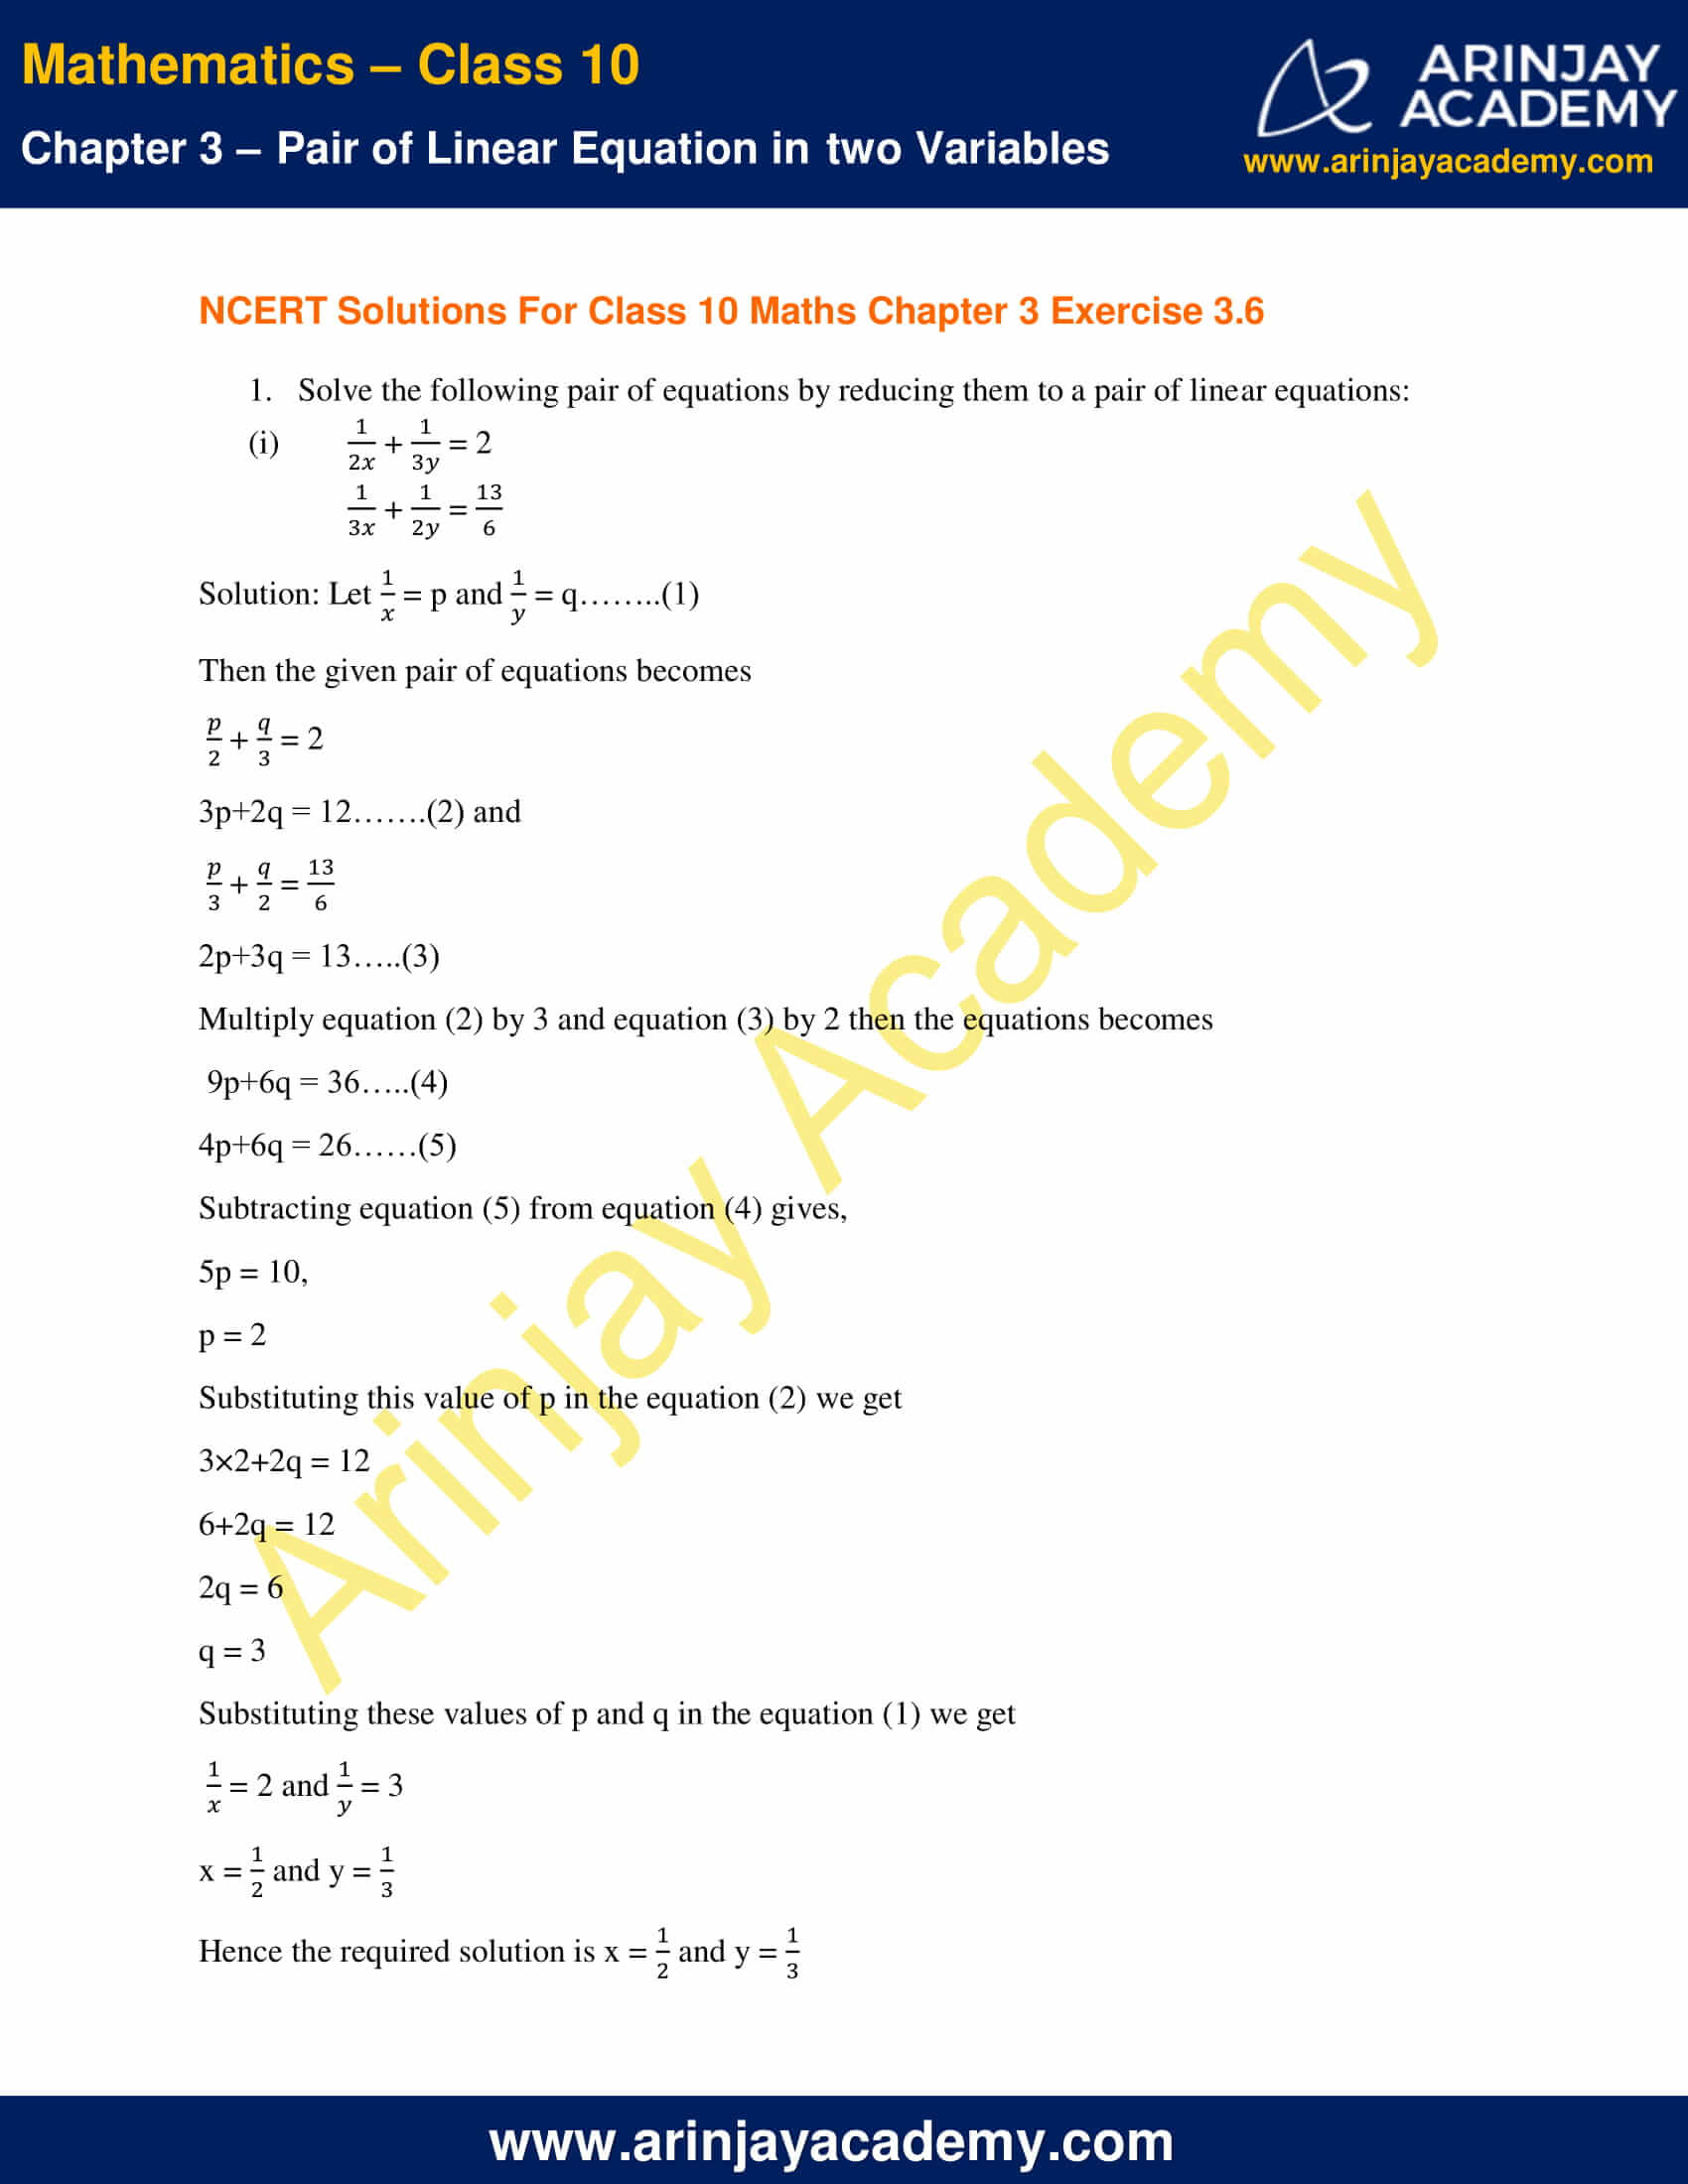 NCERT Solutions For Class 10 Maths Chapter 3 Exercise 3.6 image 1